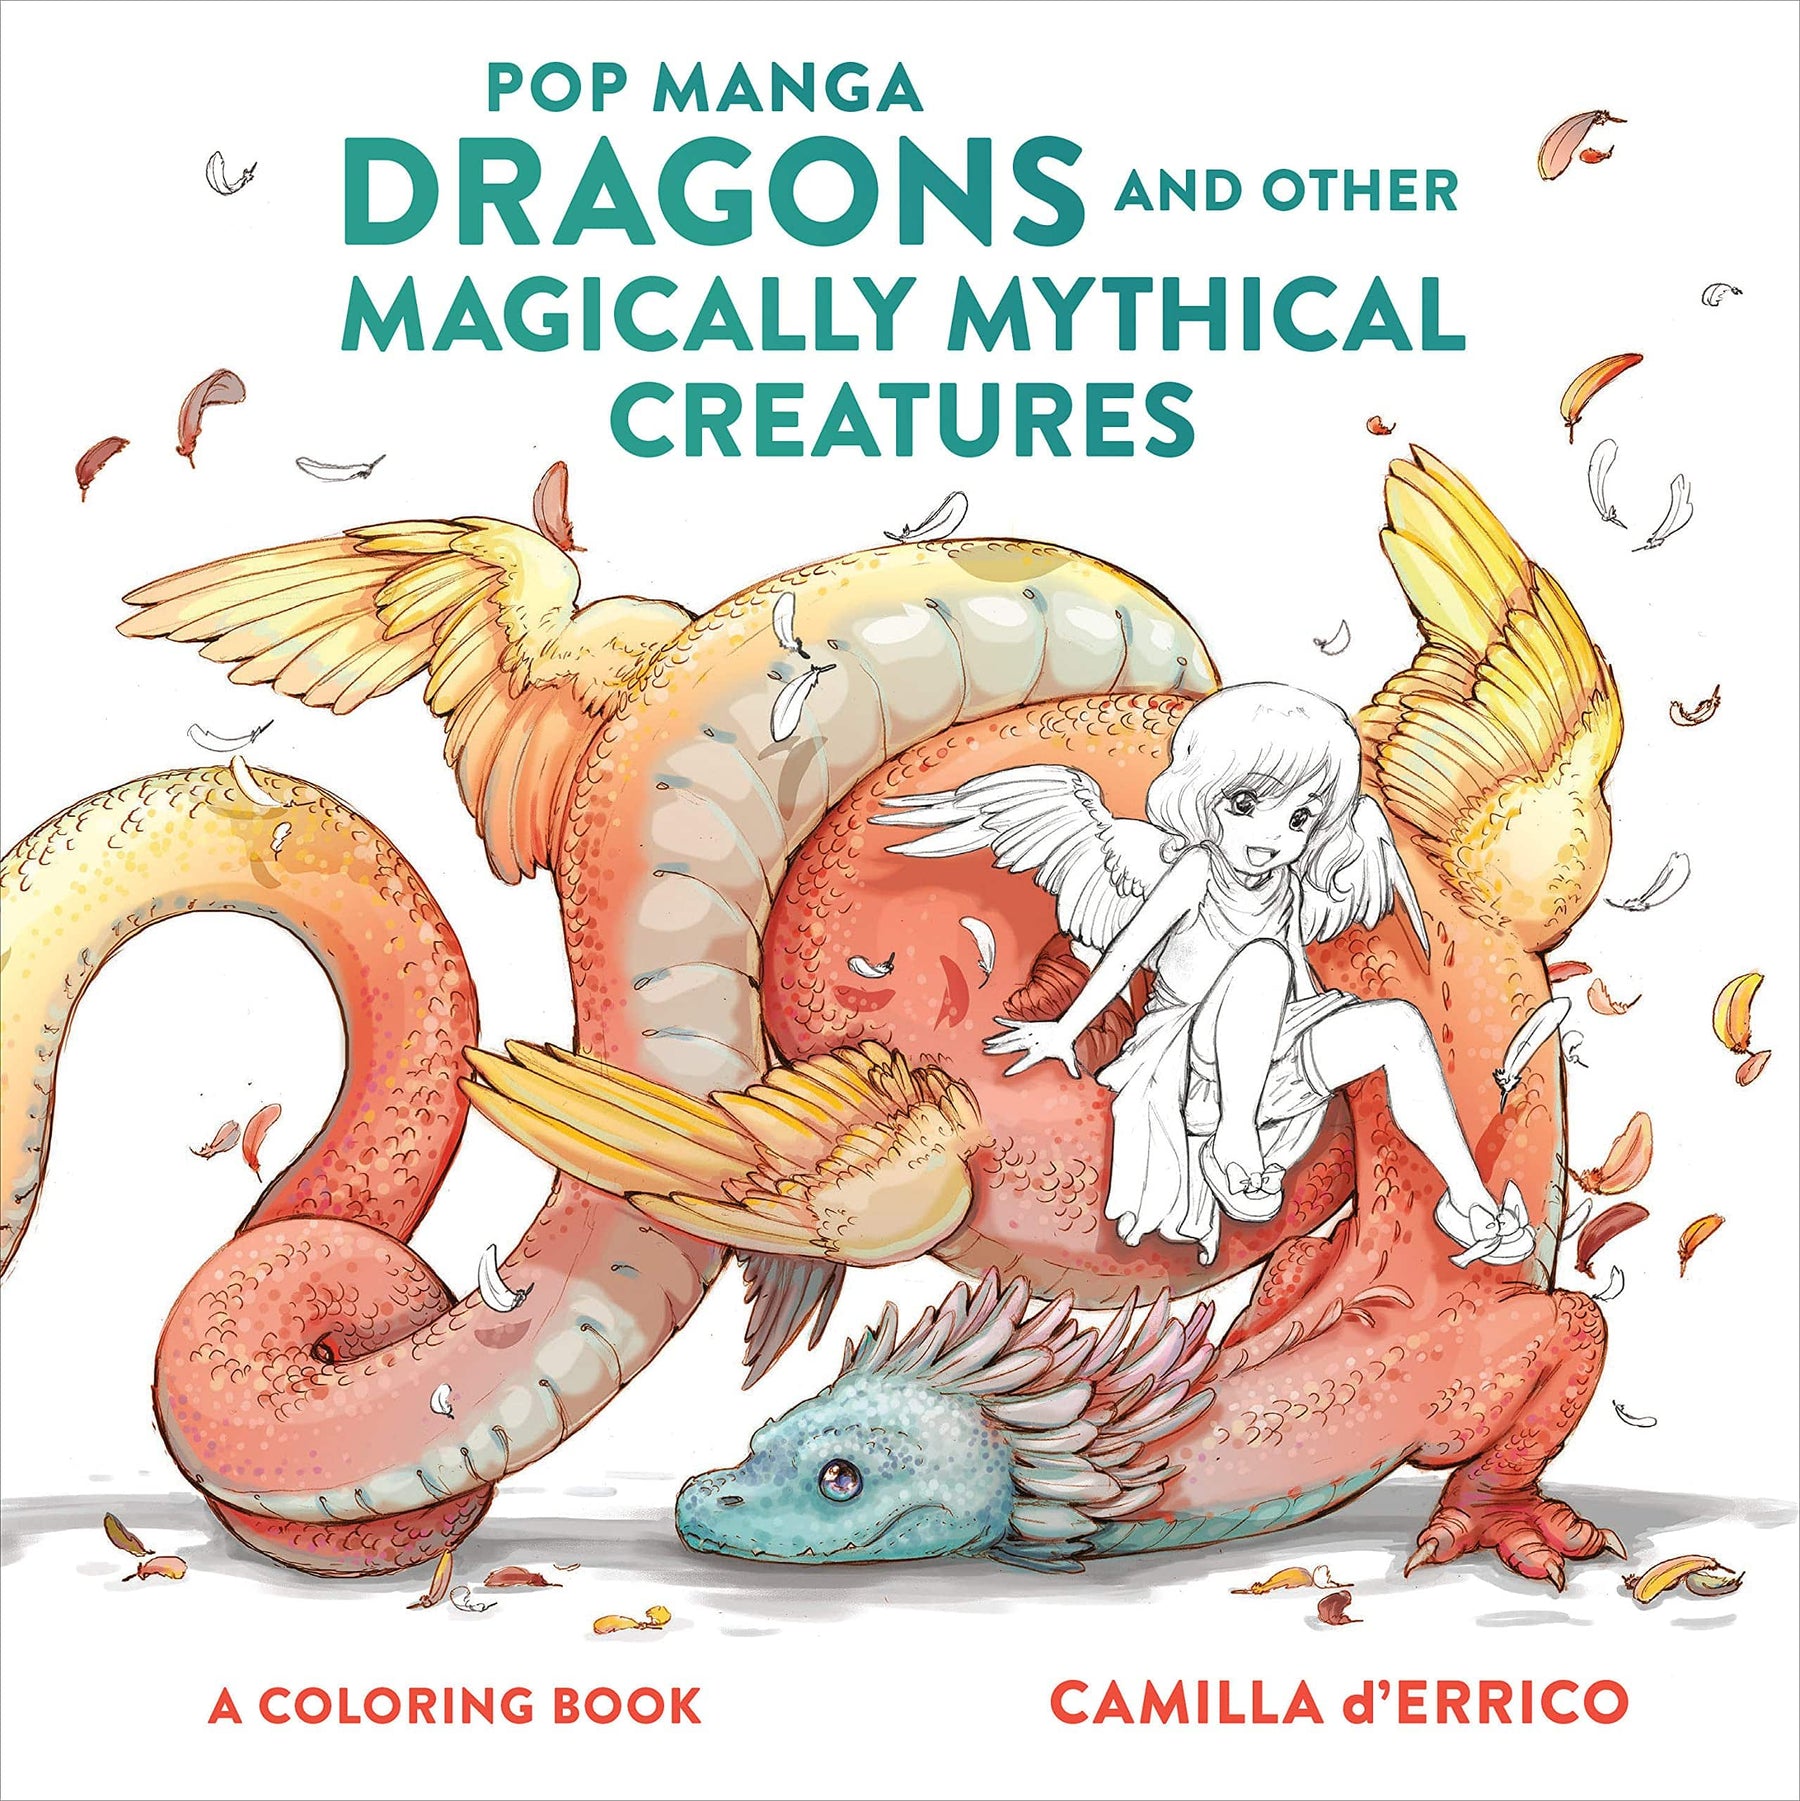 Coloring Book: Pop Manga Dragons and Other Magically Mythical Creatures - Third Eye